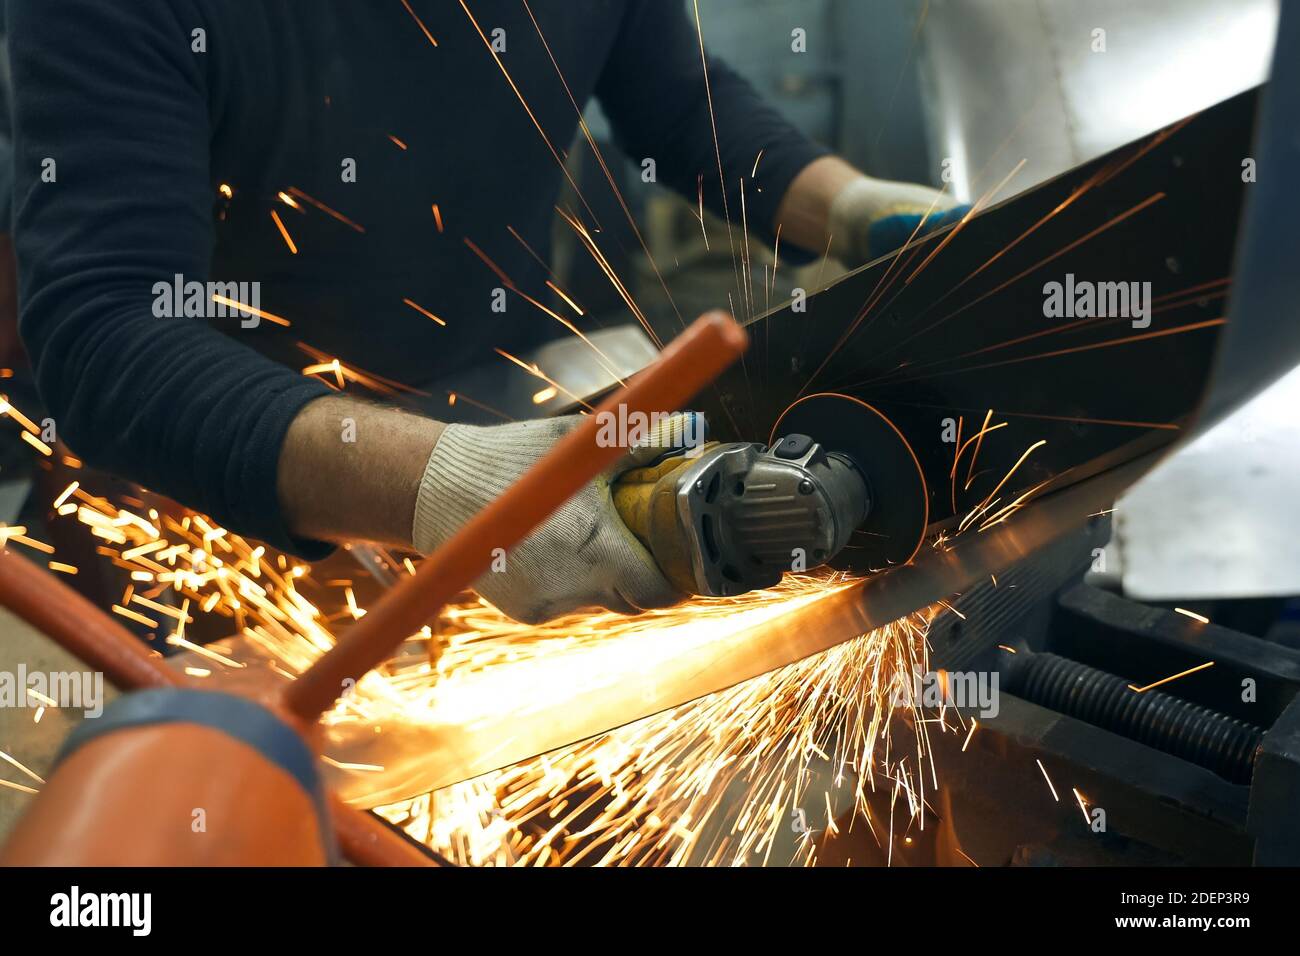 Metal processing with angle grinder. Sparks in metalworking Stock Photo